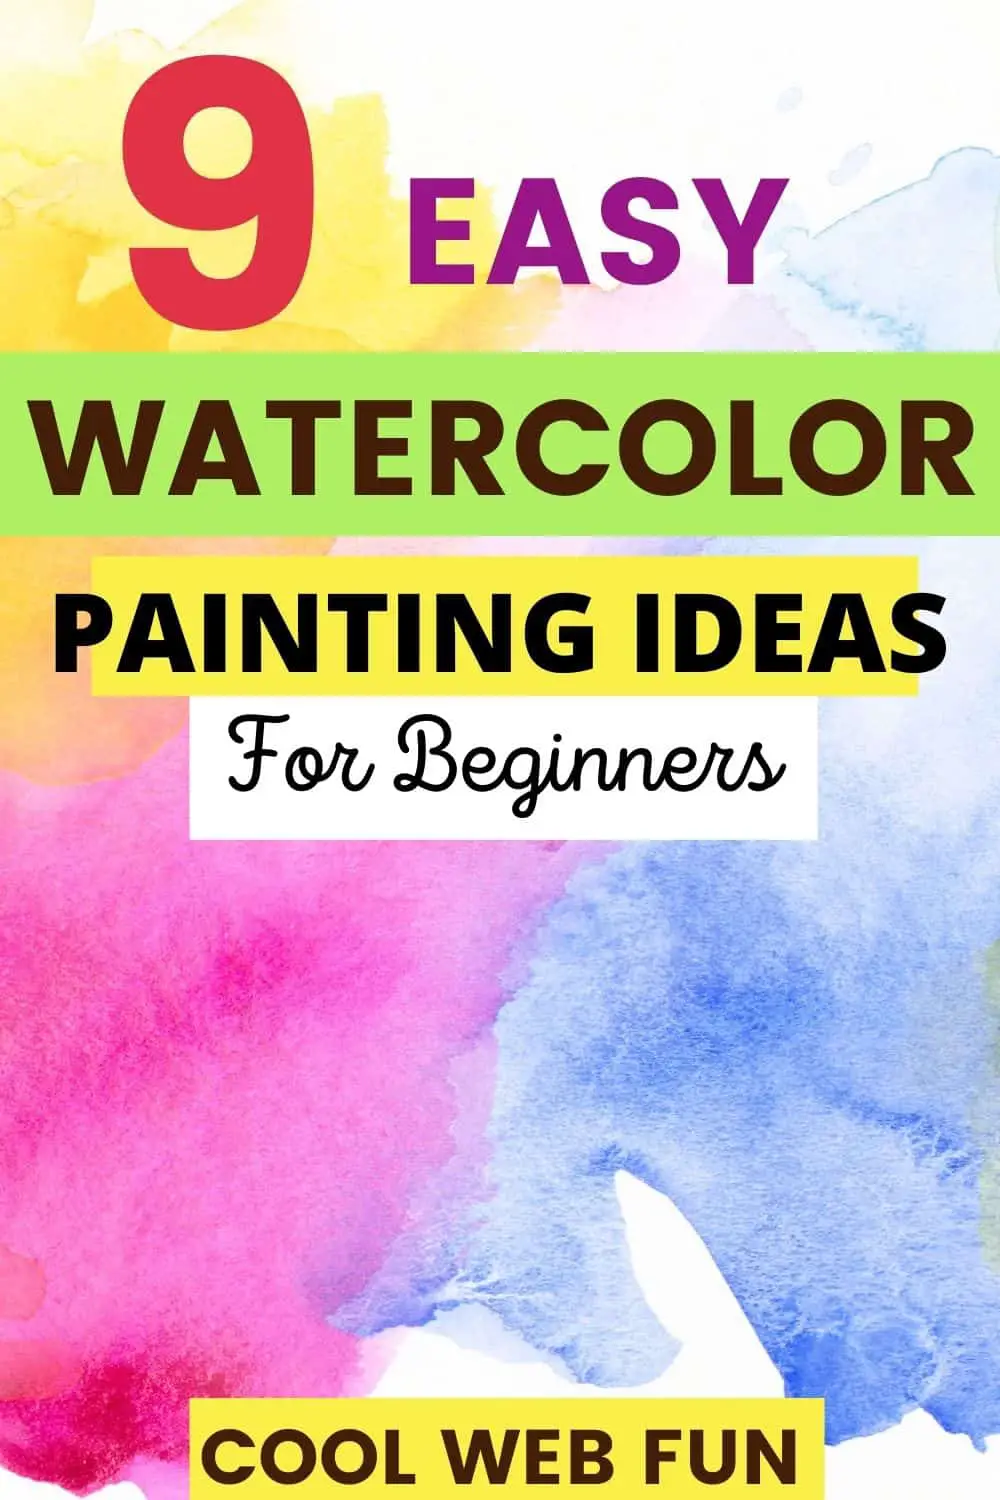 WATERCOLOR IDEAS FOR BEGINNERS 